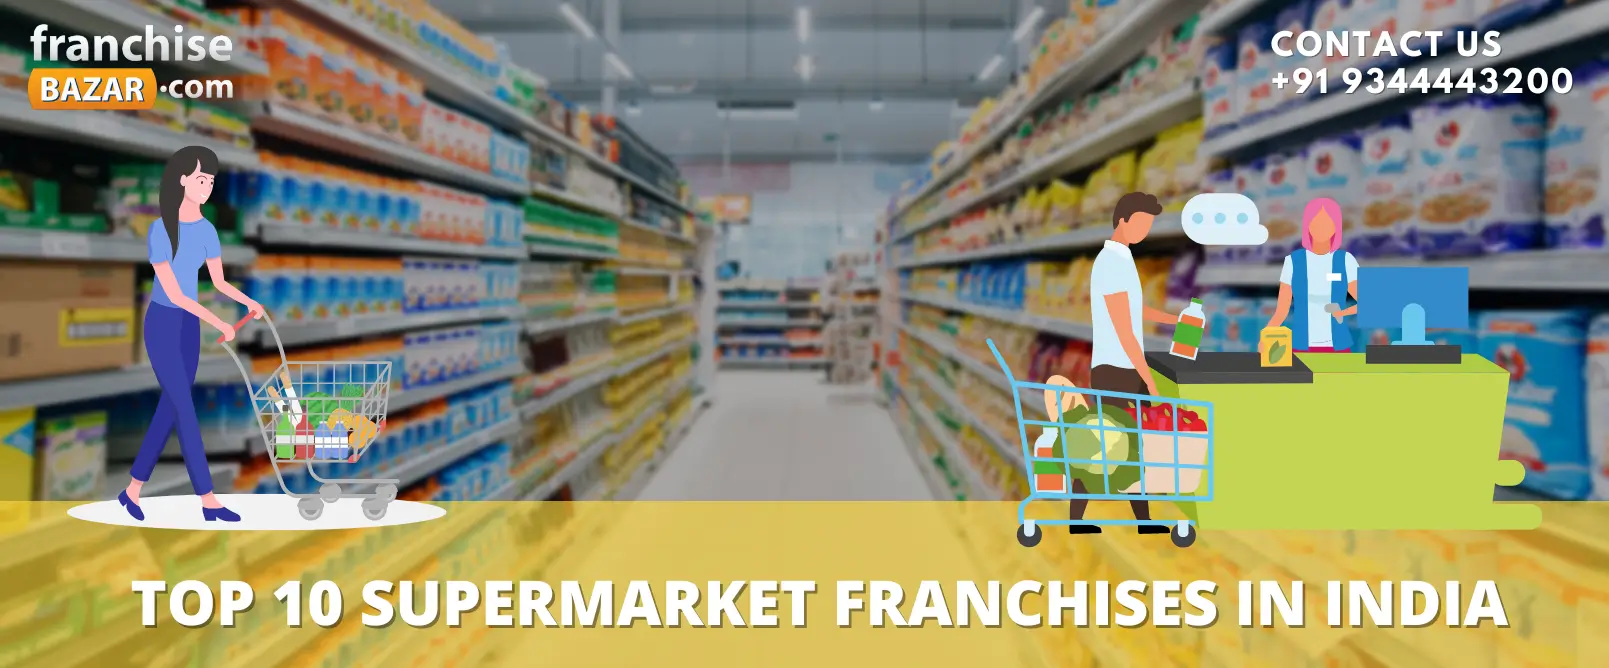 supermarket franchise opportunity in India